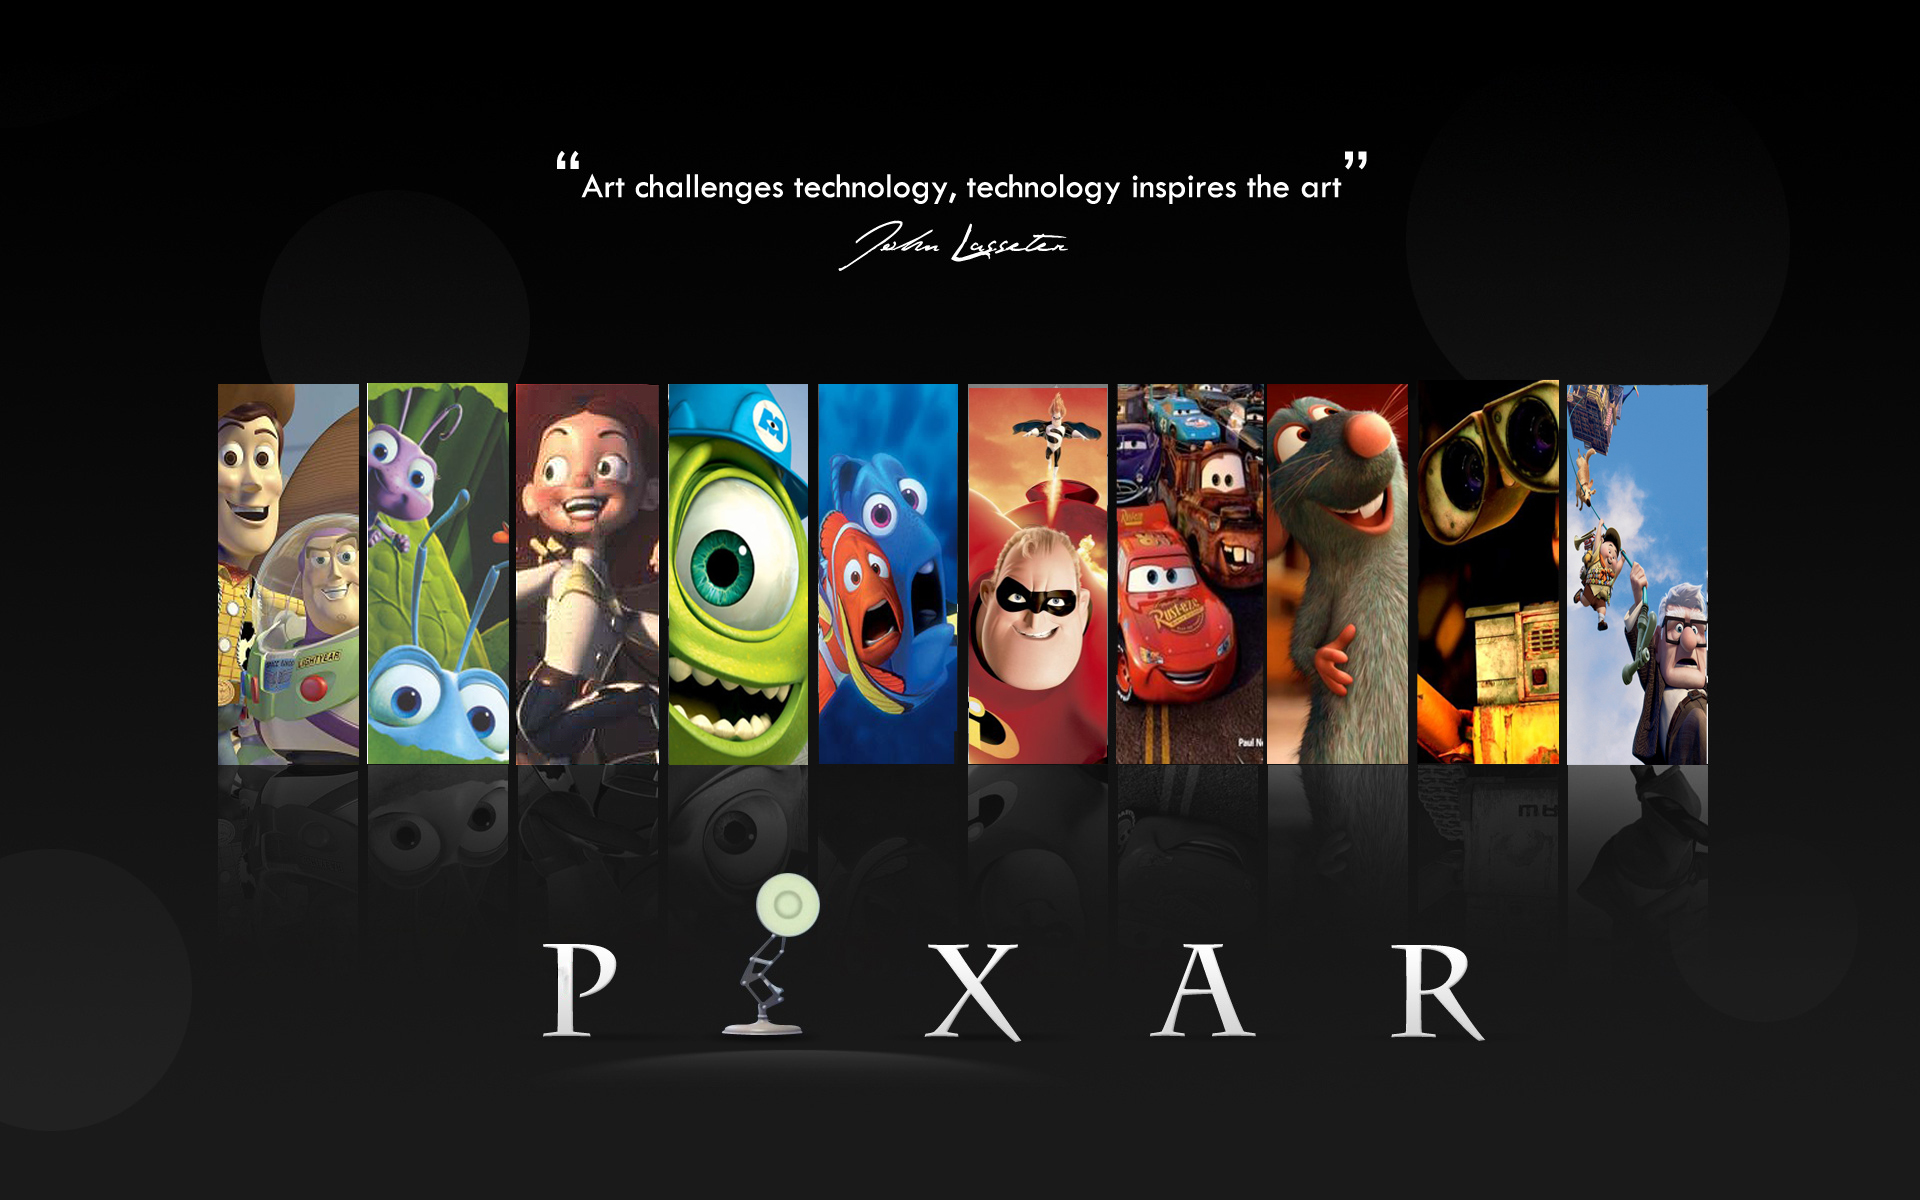  Wallpapers Desktop on Disney Company Wall E Cars Quotes Up Movie Hd Wallpaper Of Movies   Tv